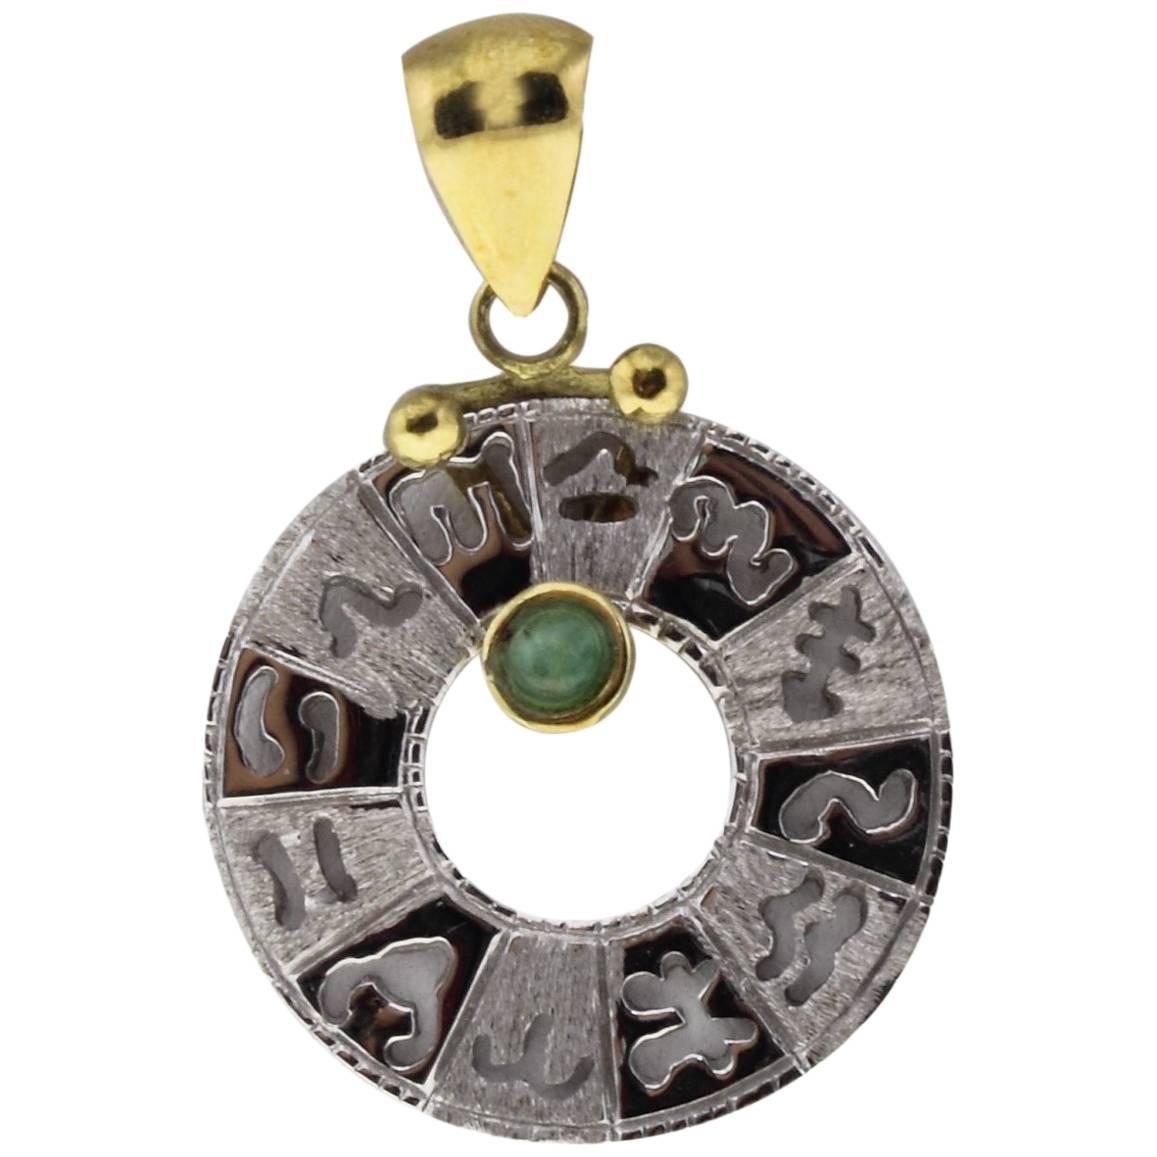 Luise 18 kt Gold Pendant with Emerald Representing Zodiac Signs